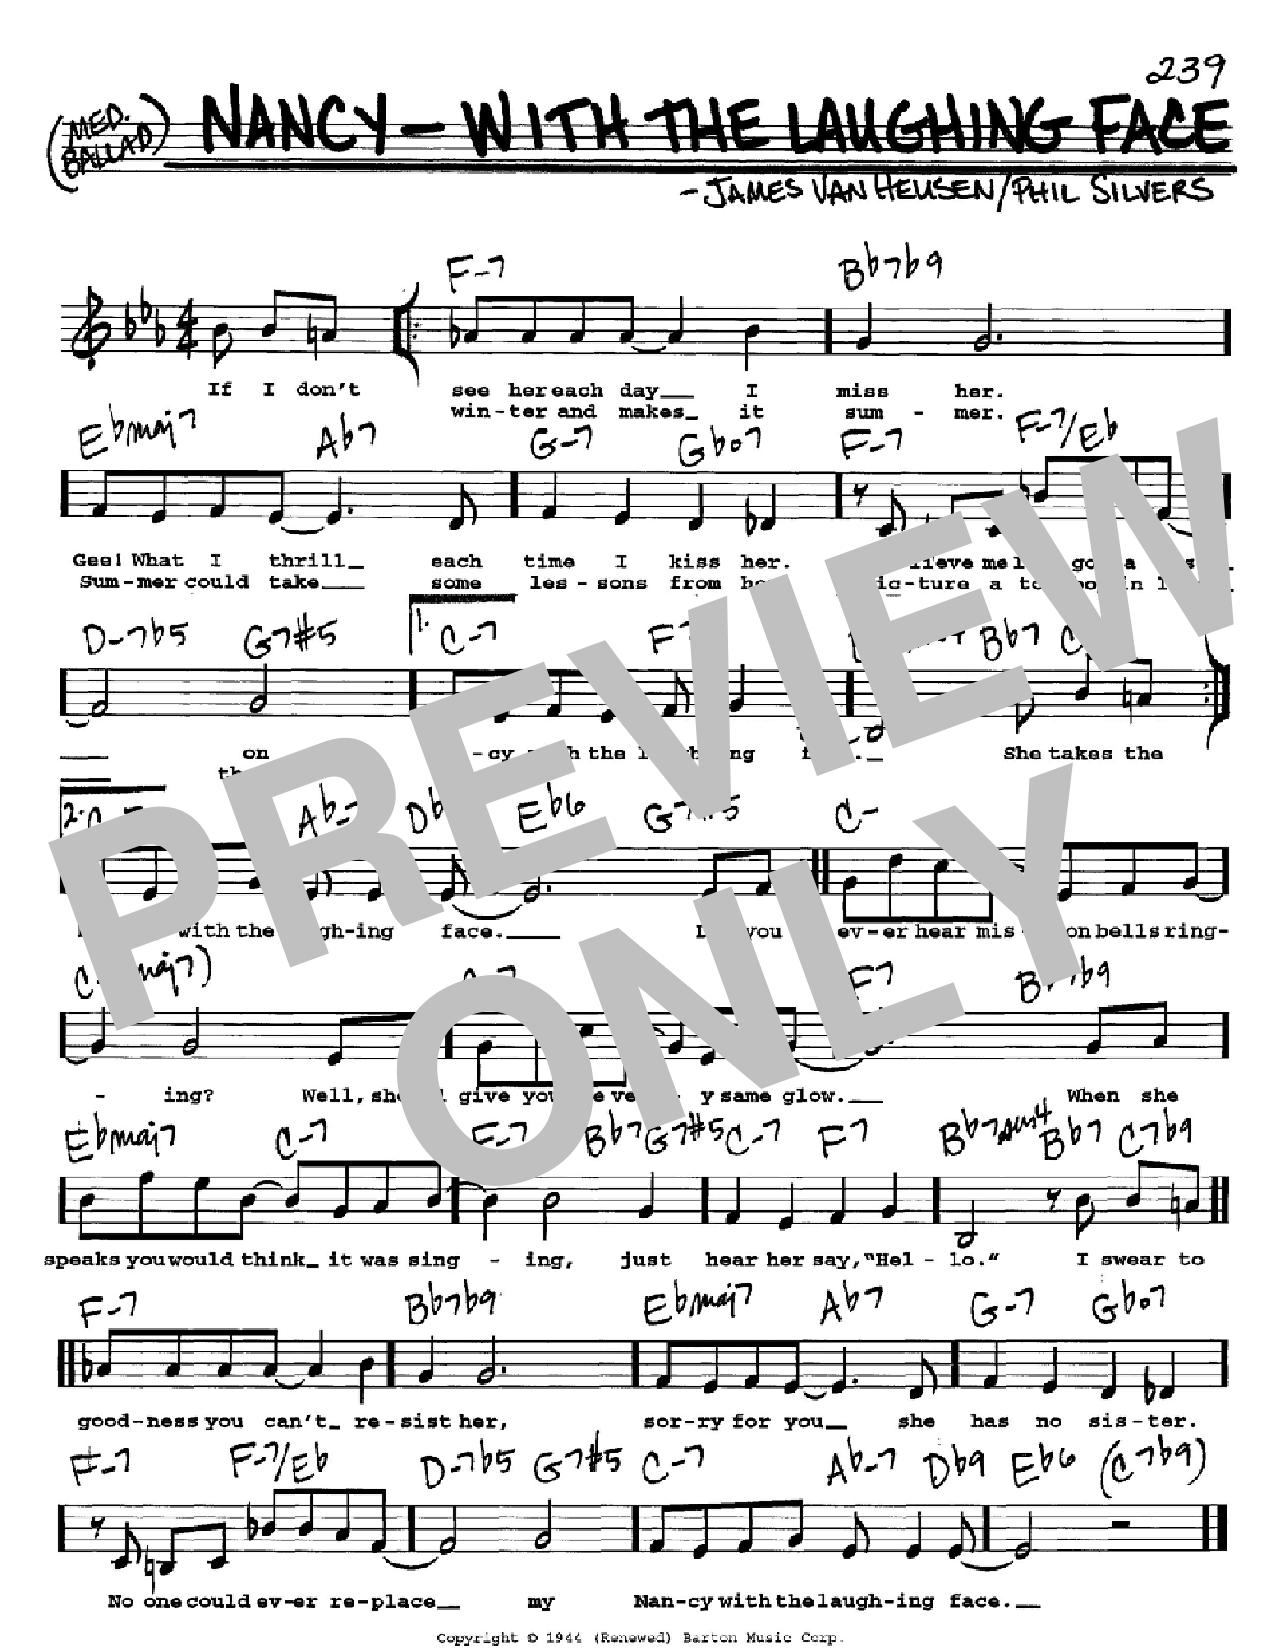 Download Phil Silvers Nancy - With The Laughing Face Sheet Music